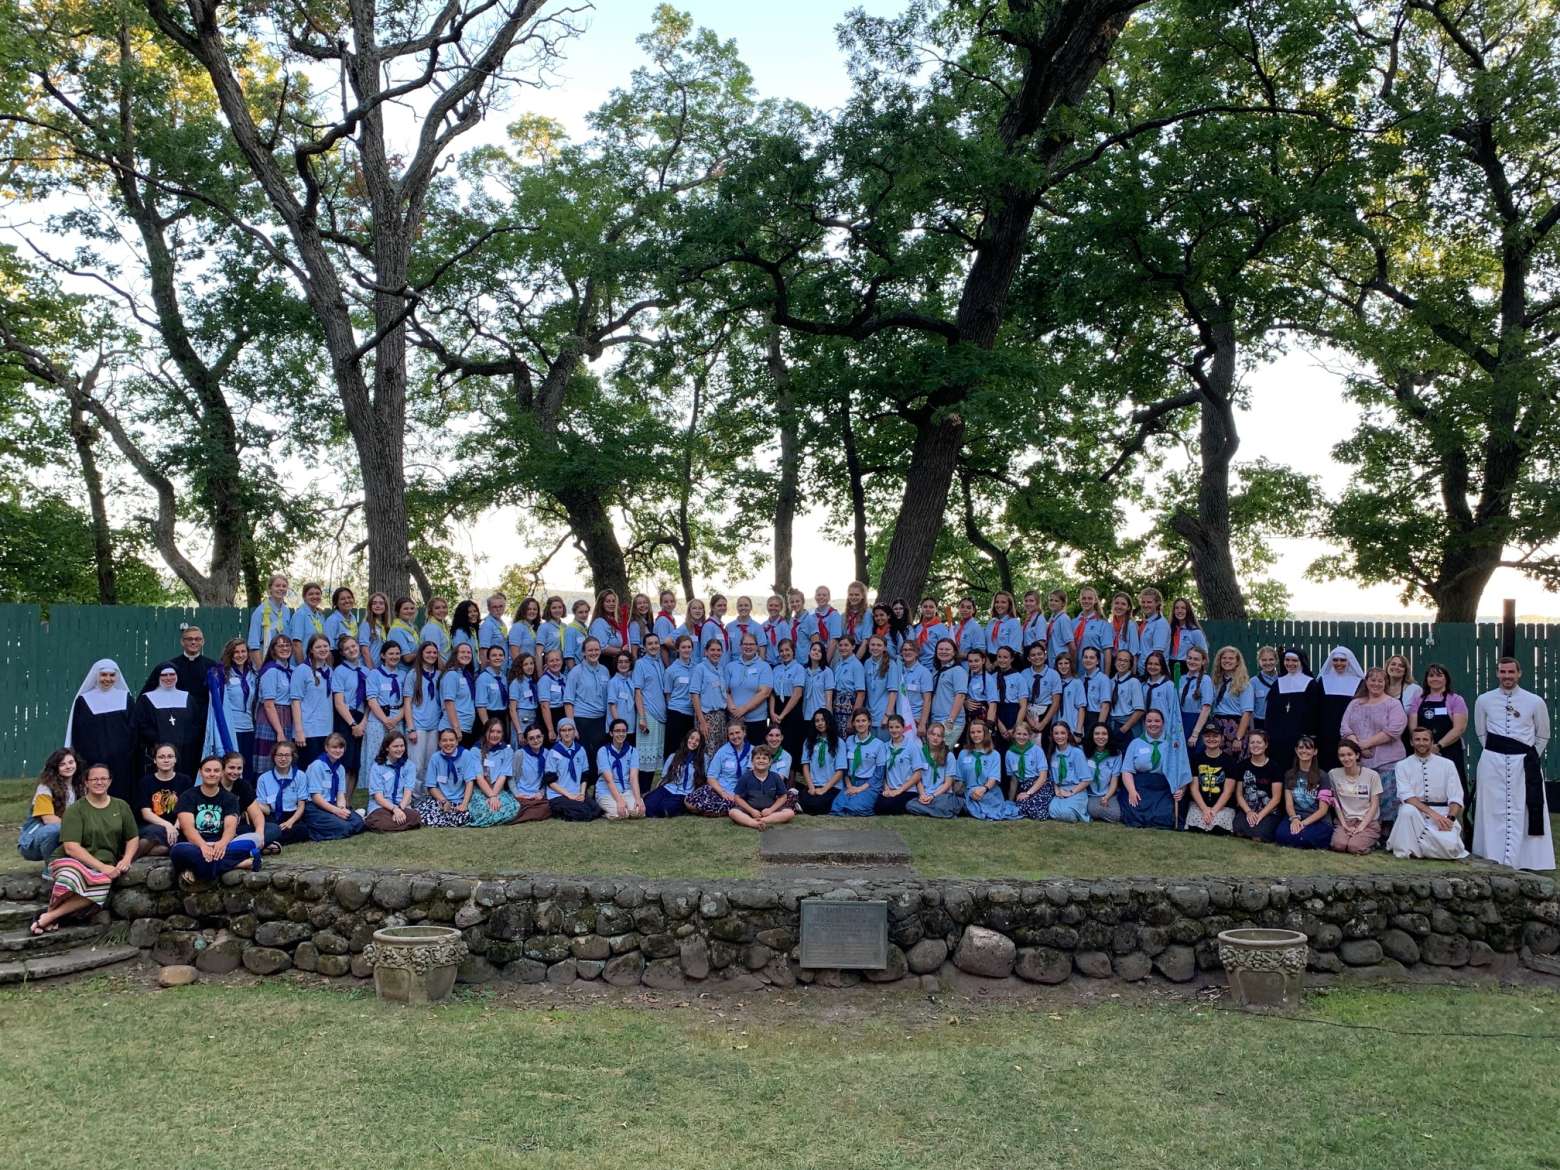  A Recap of the Summer: Immaculate Conception Camp